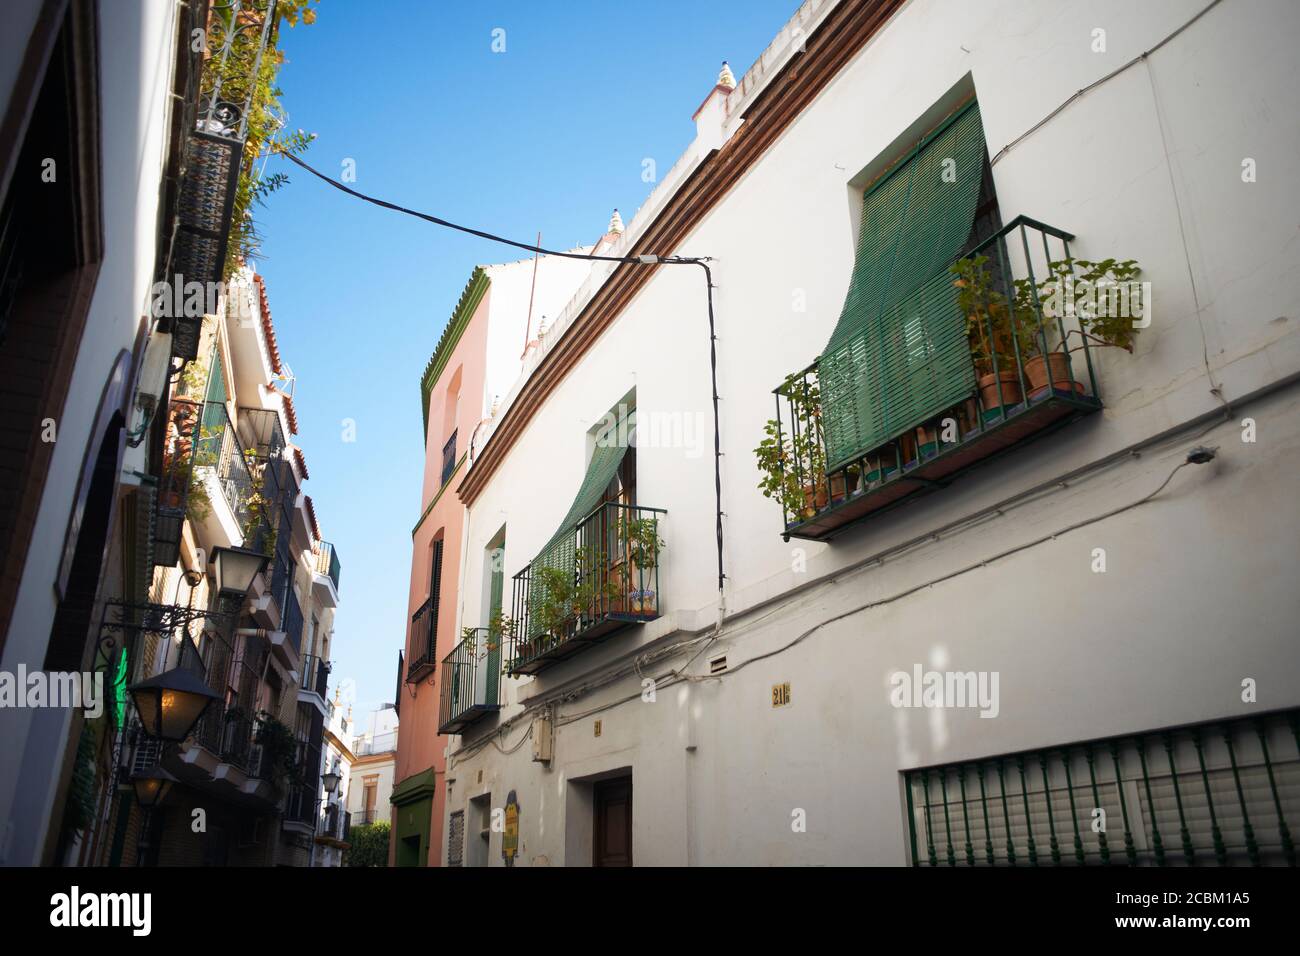 Traditional house exteriors on narrow street, Seville, Andalusia, Spain Stock Photo